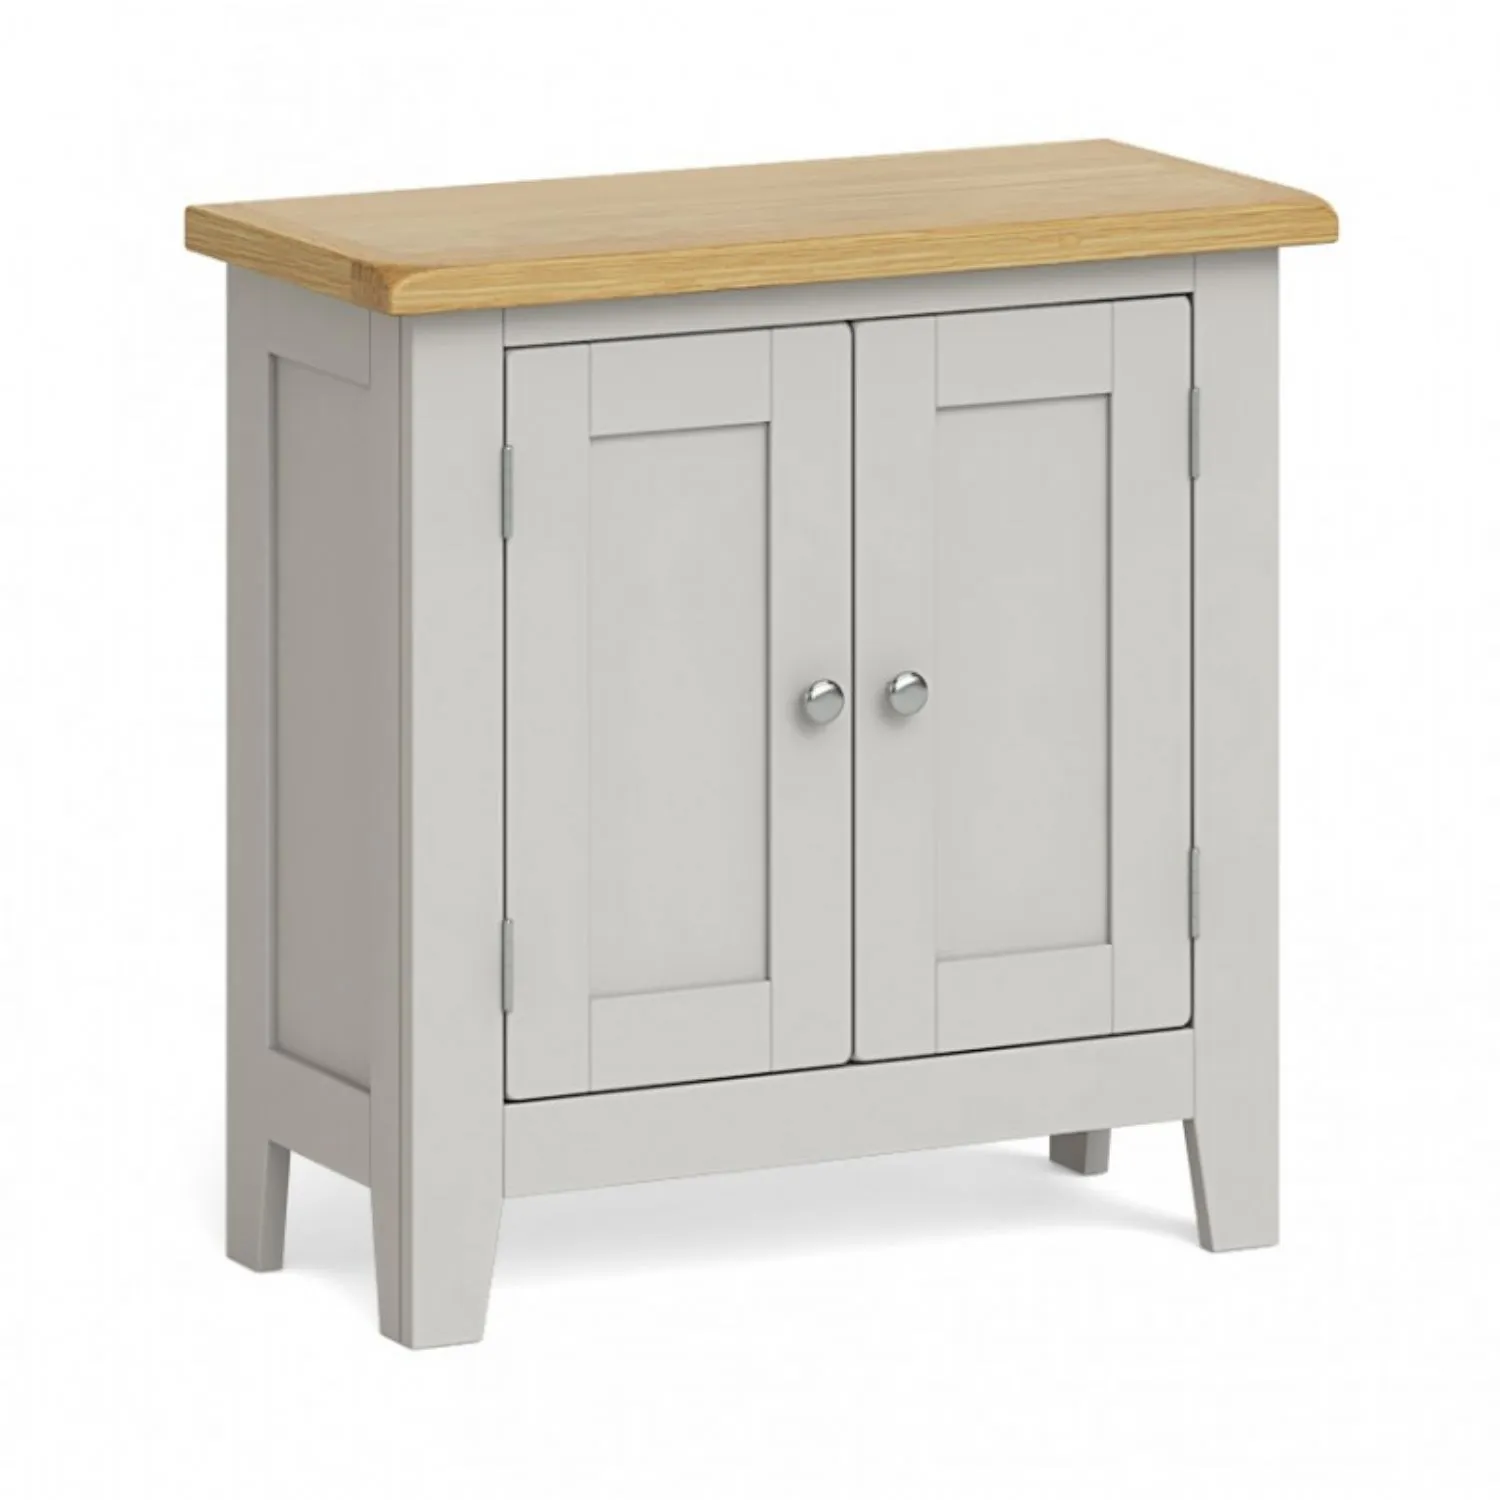 Solid Oak and Grey Painted 70cm Mini Cupboard